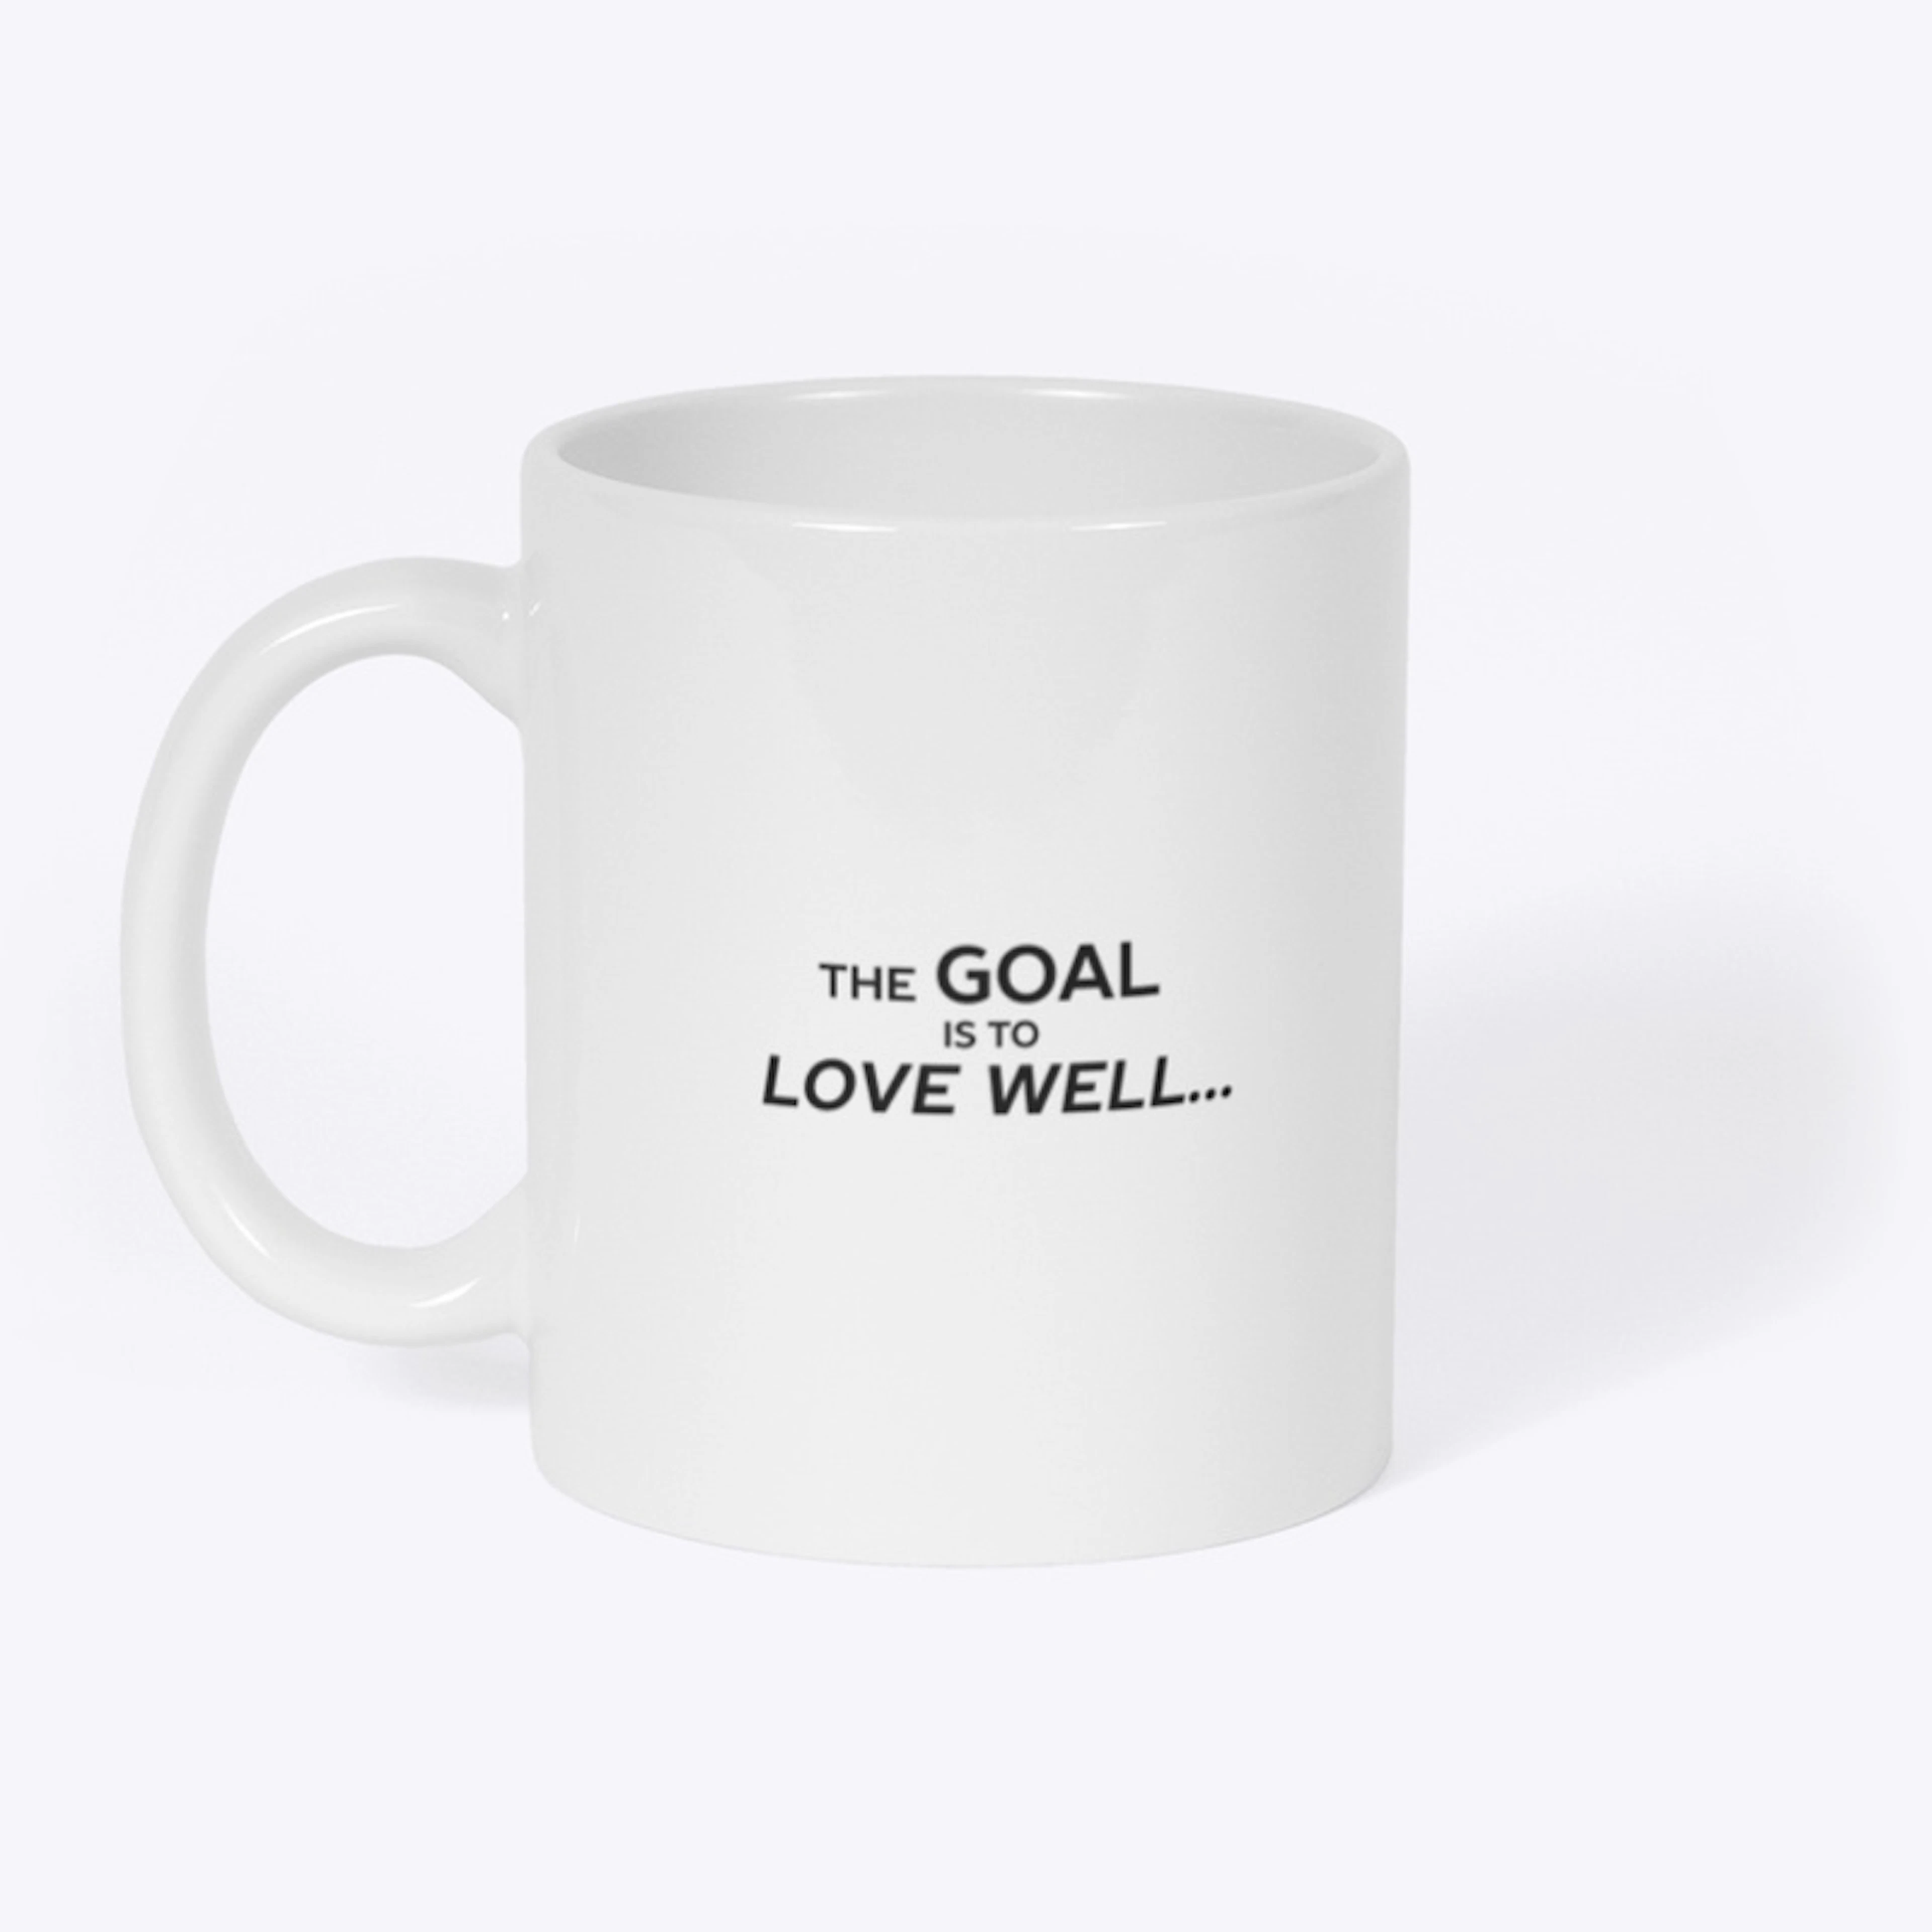 The Goal is to Love Well ...